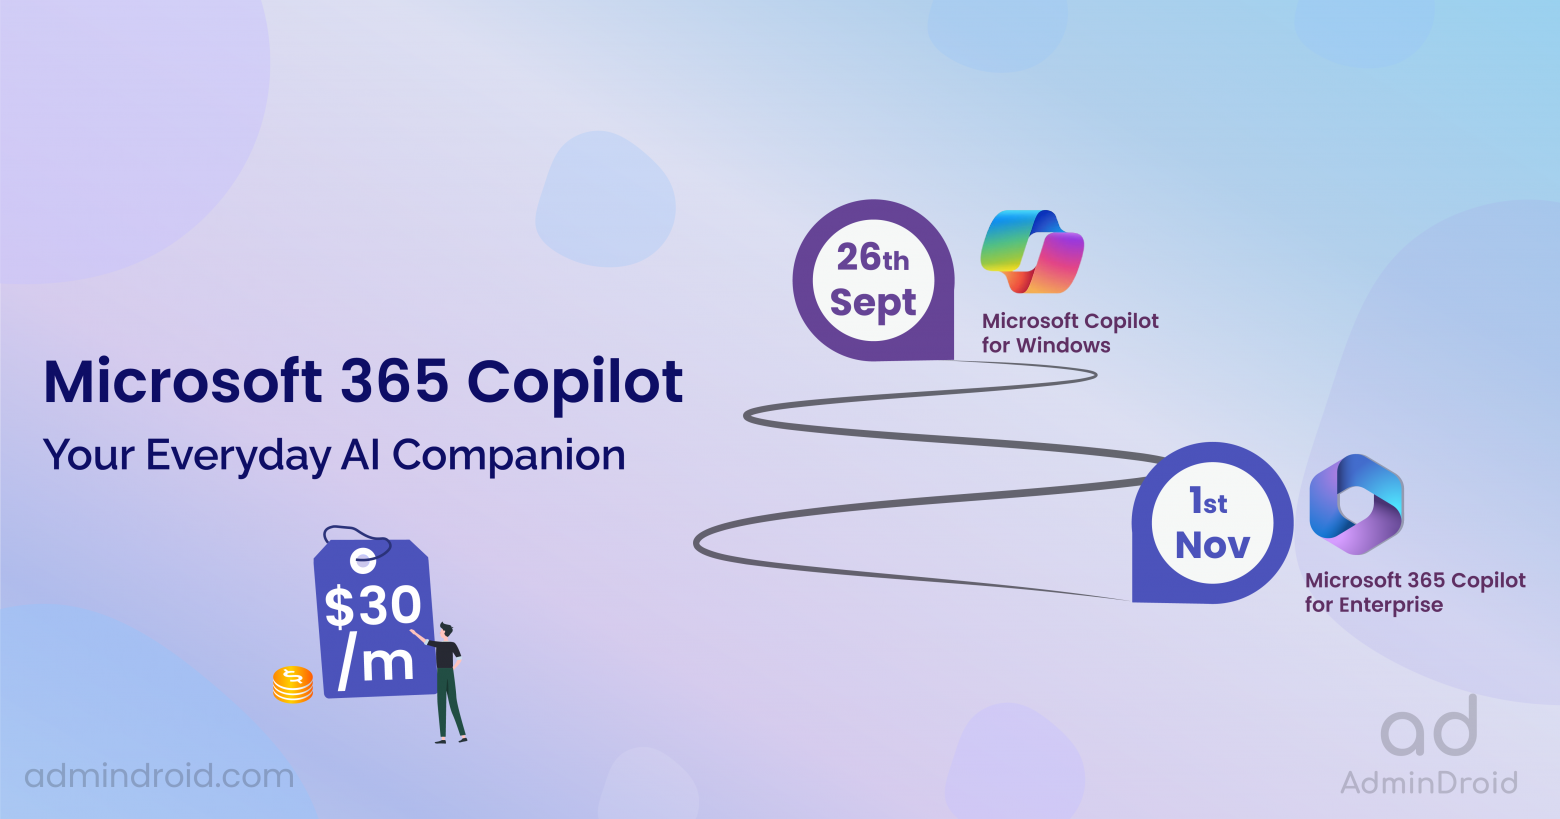 Microsoft 365 Copilot Hits General Availability This September 26